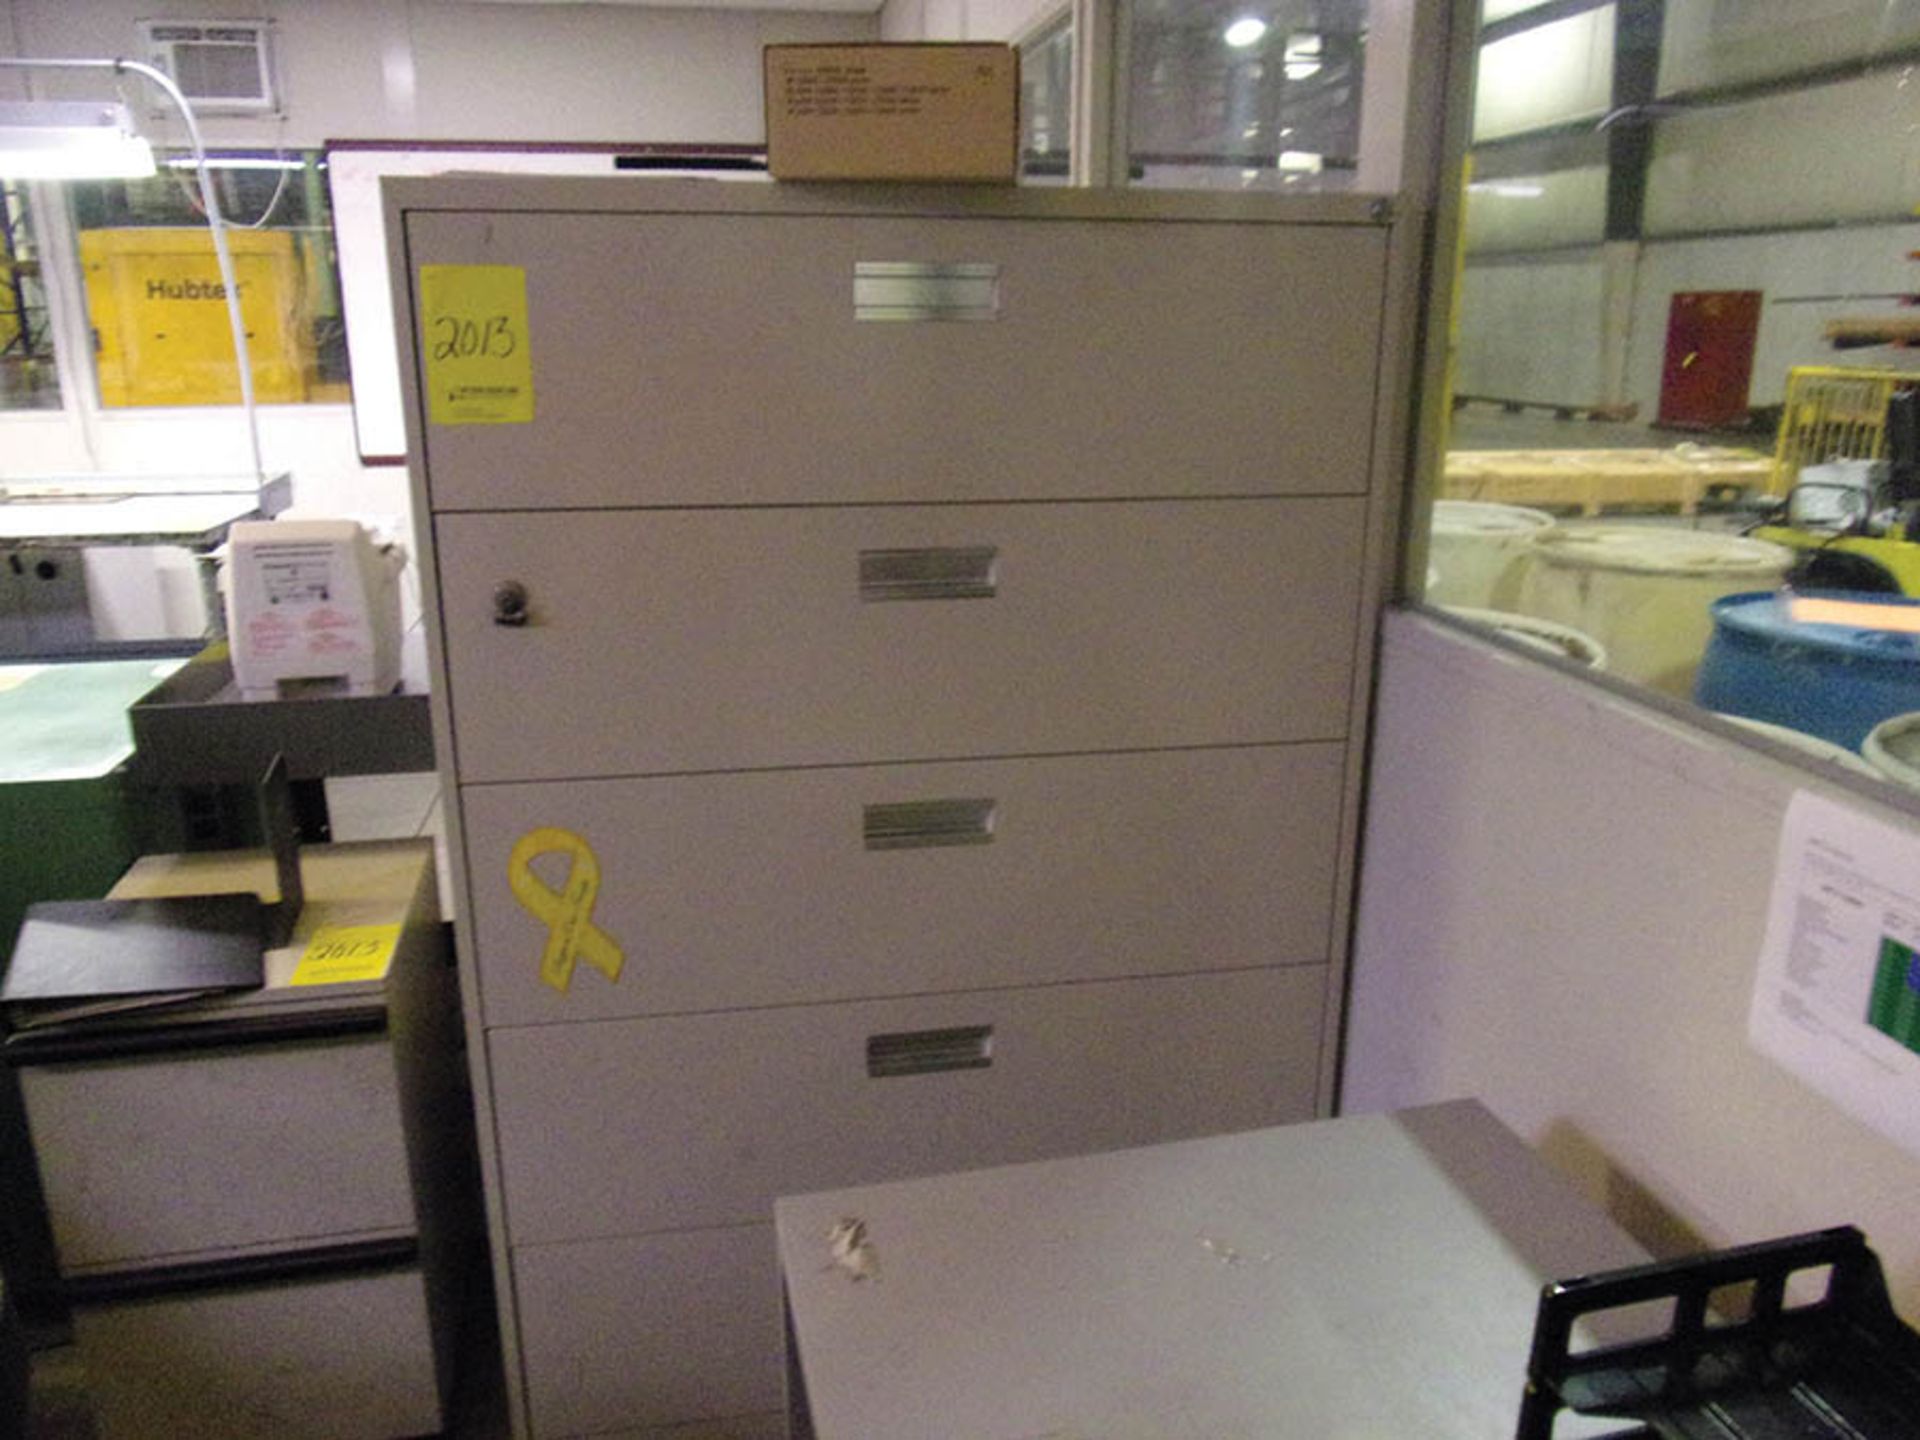 (4) DESKS, CHAIRS, (2) PC'S, (1) PANASONIC COPIER, LATERAL FILE CABINET - Image 2 of 3